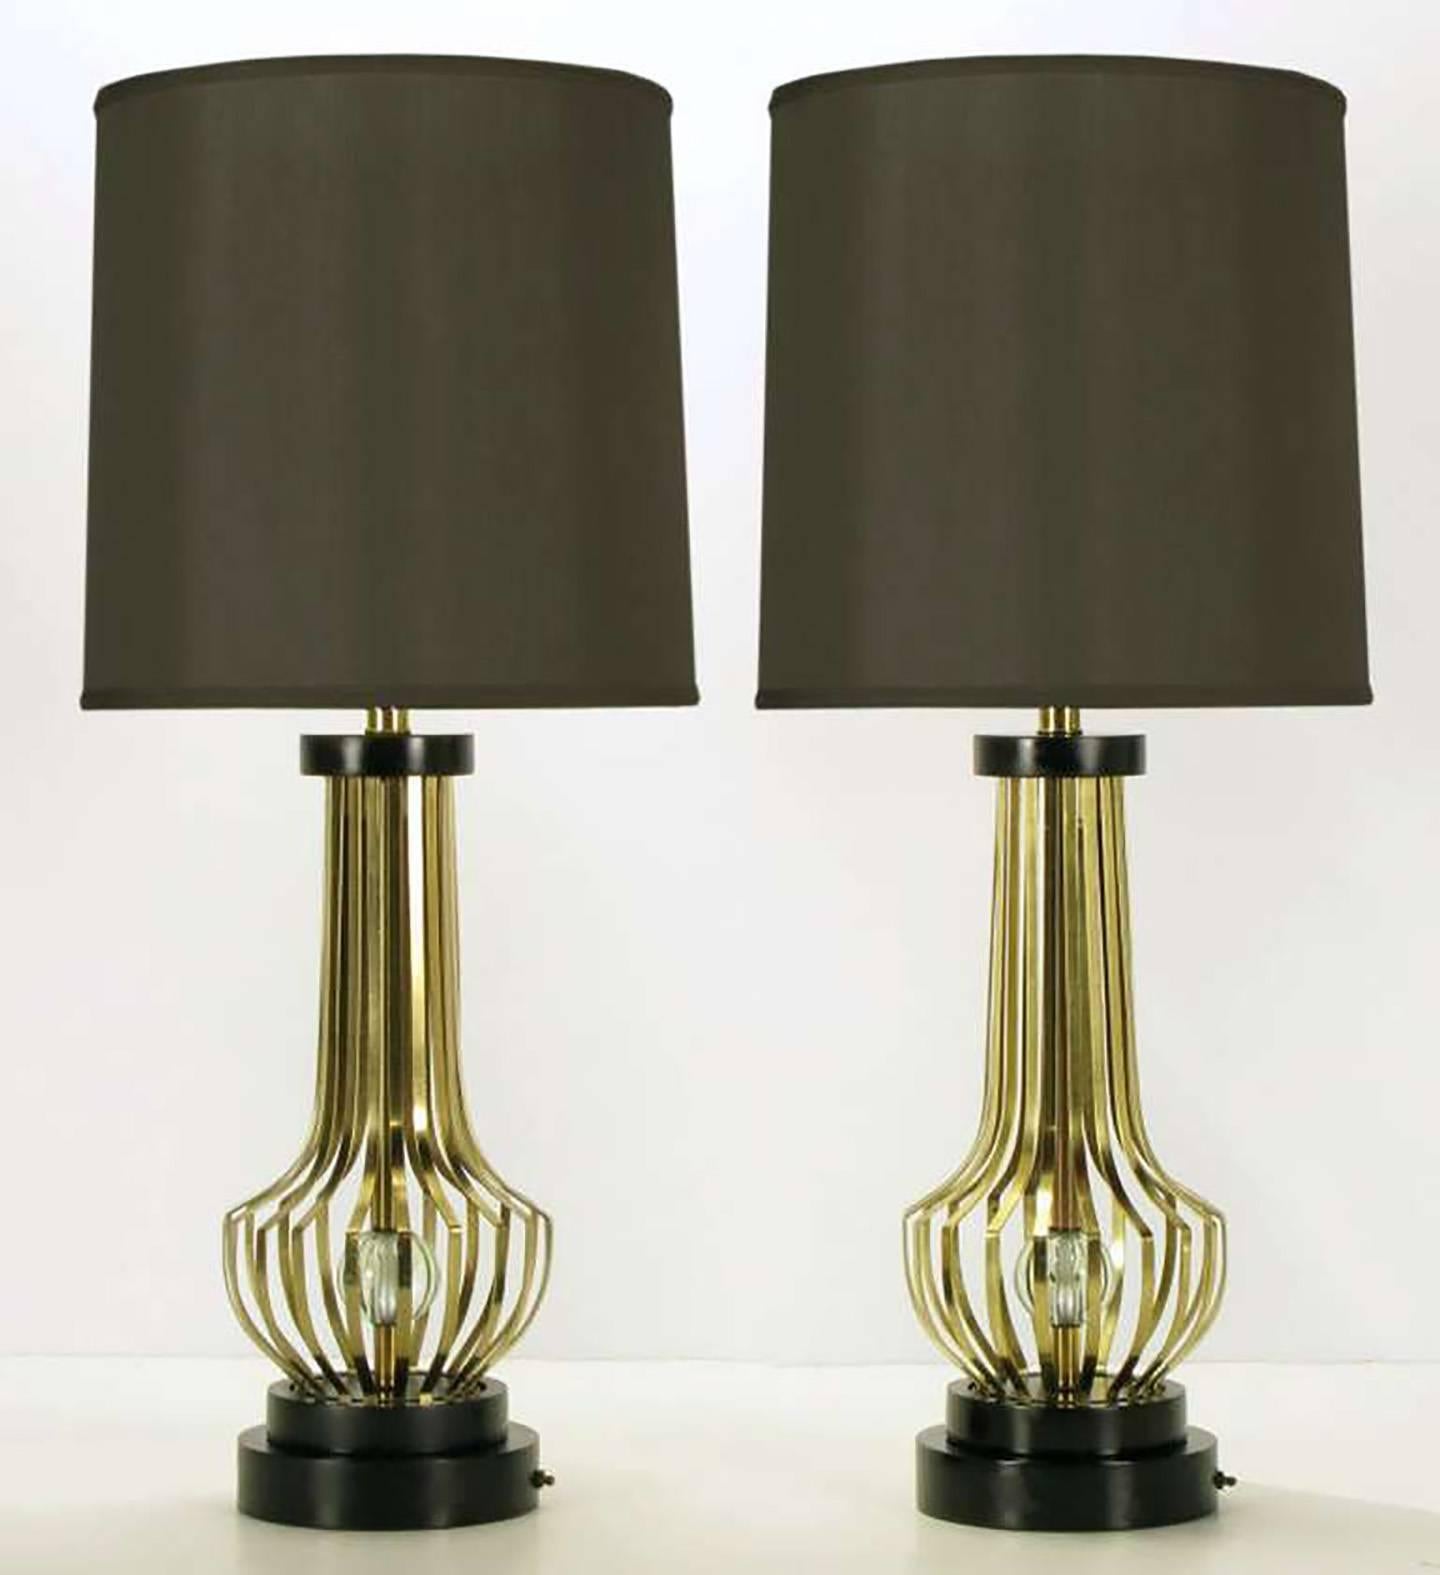 Pair of vase form open rib table lamps with internal crystal spheres. Black lacquered and stepped round disc bases with switch and black lacquered disc cap. Original milk glass diffusers on large brass cups. Unmarked, but milk glass diffuser and